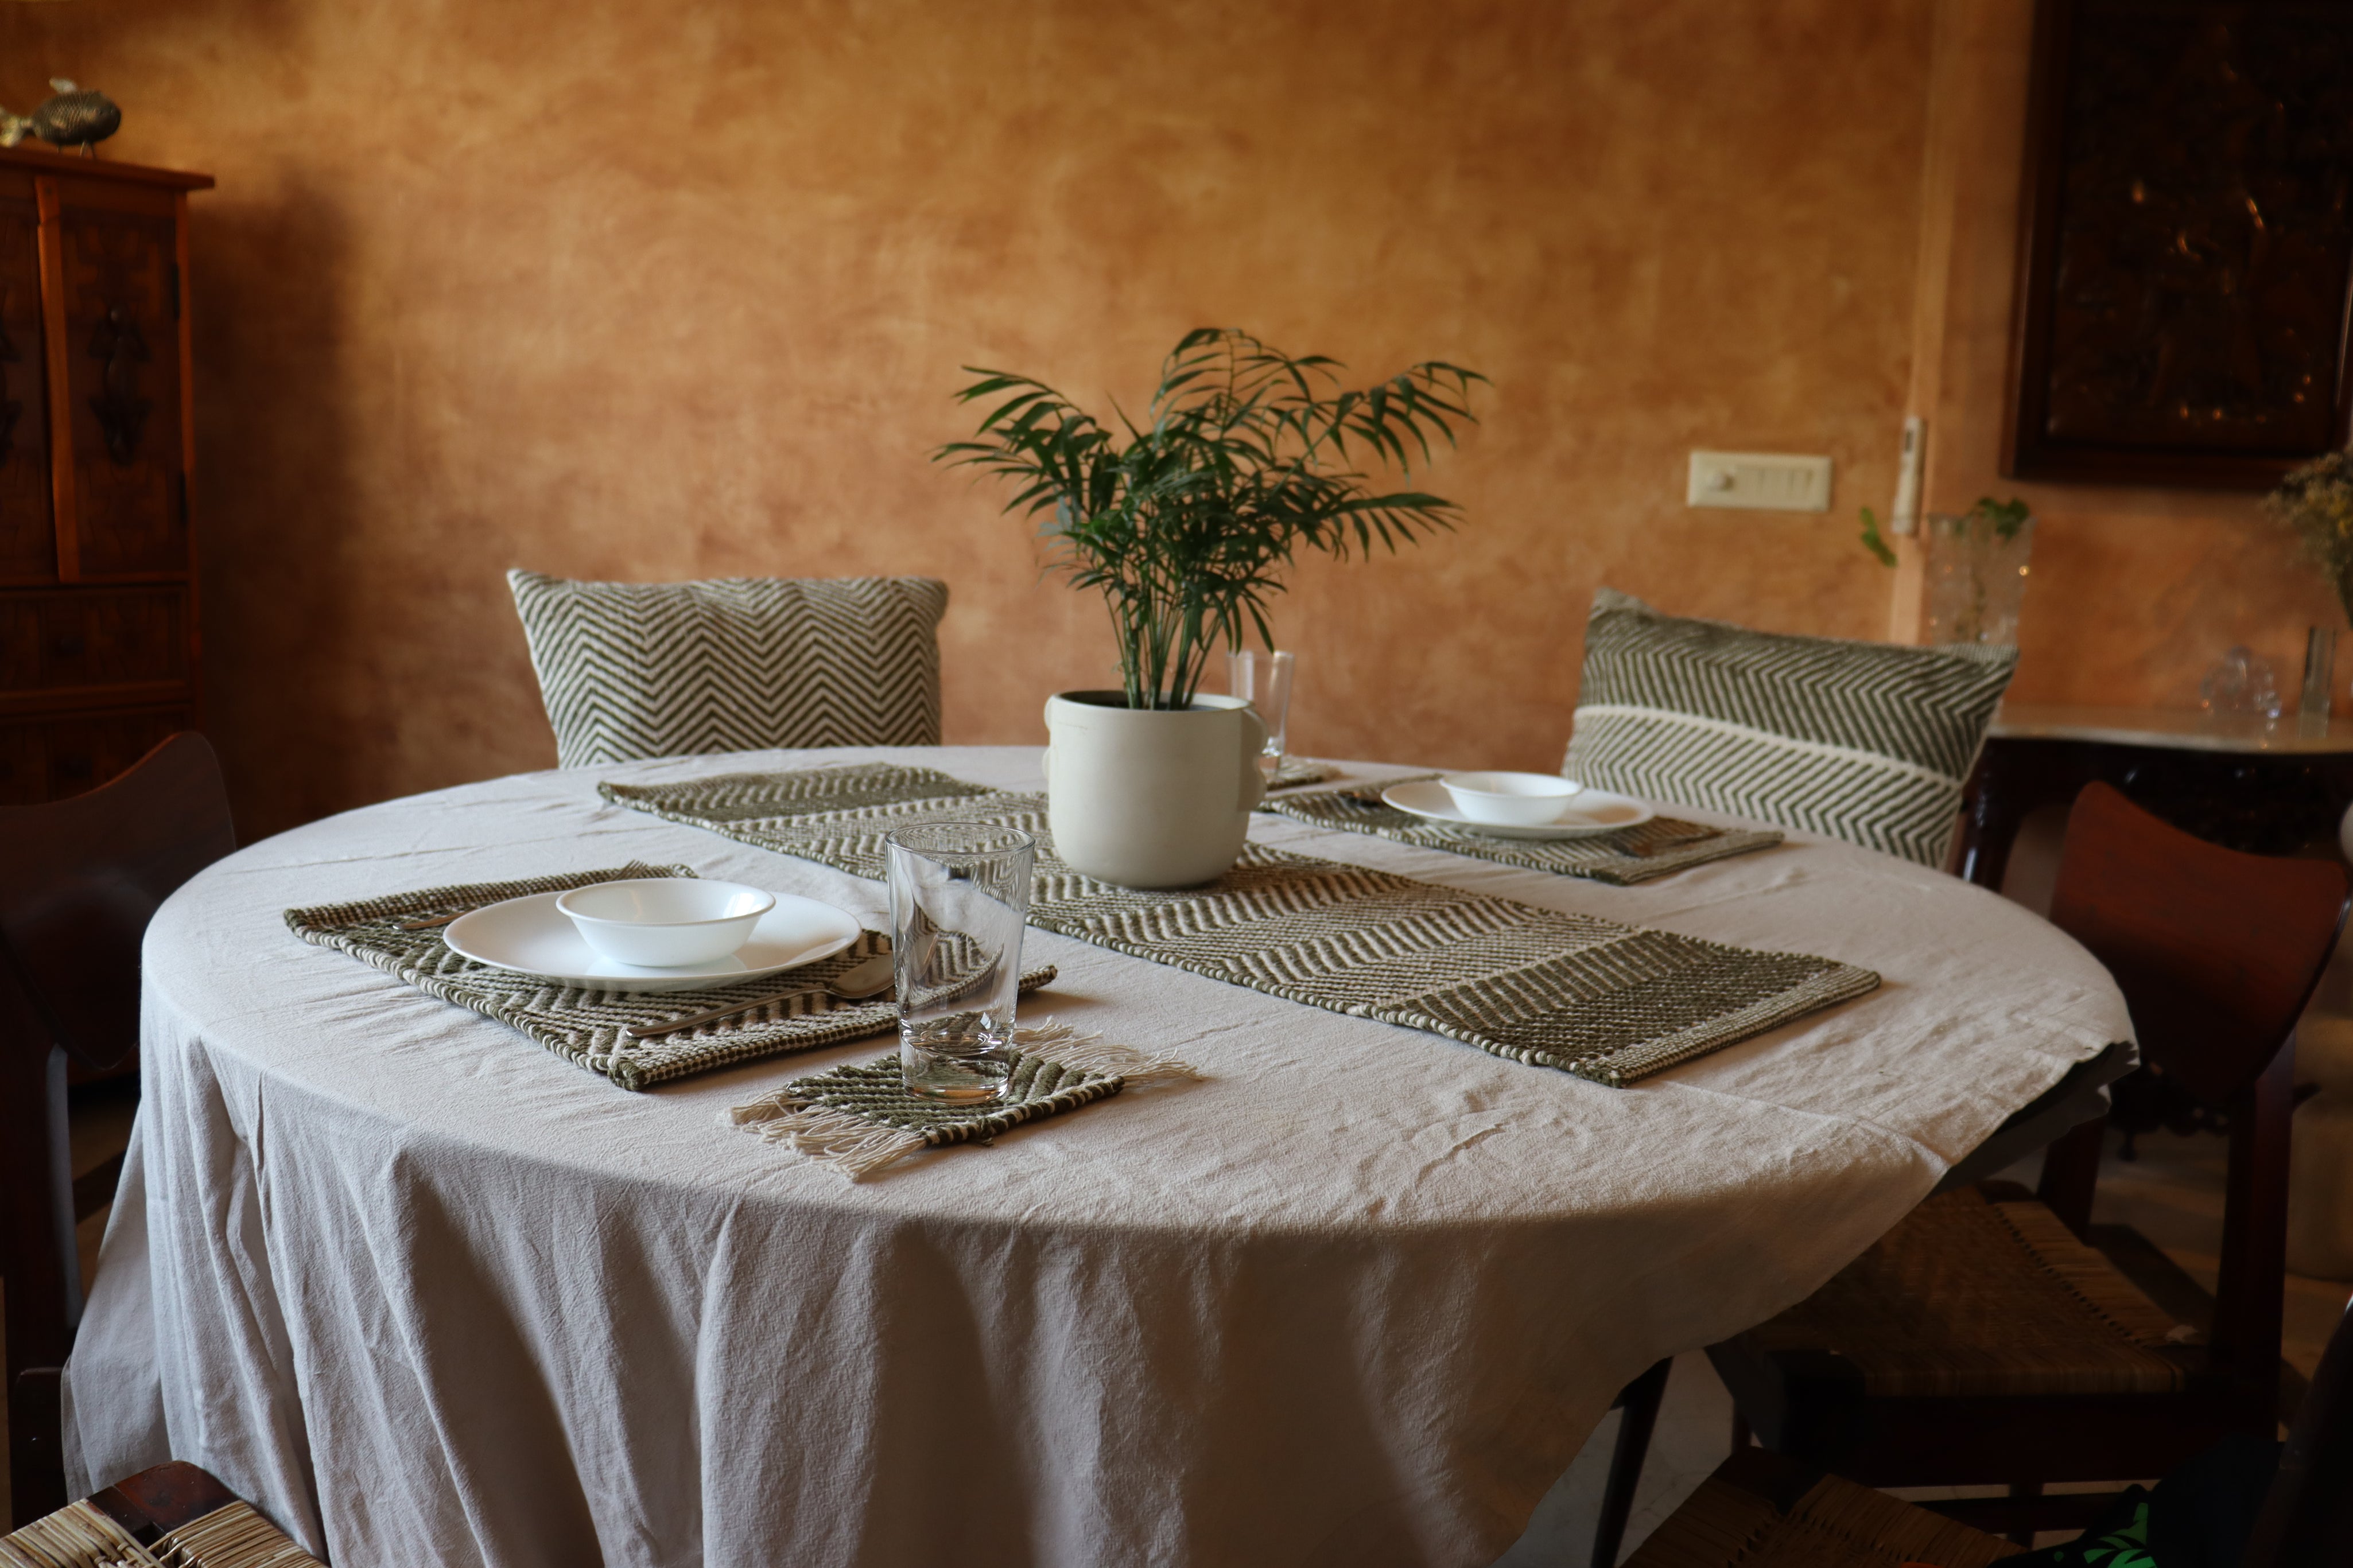 Handwoven Table Linens